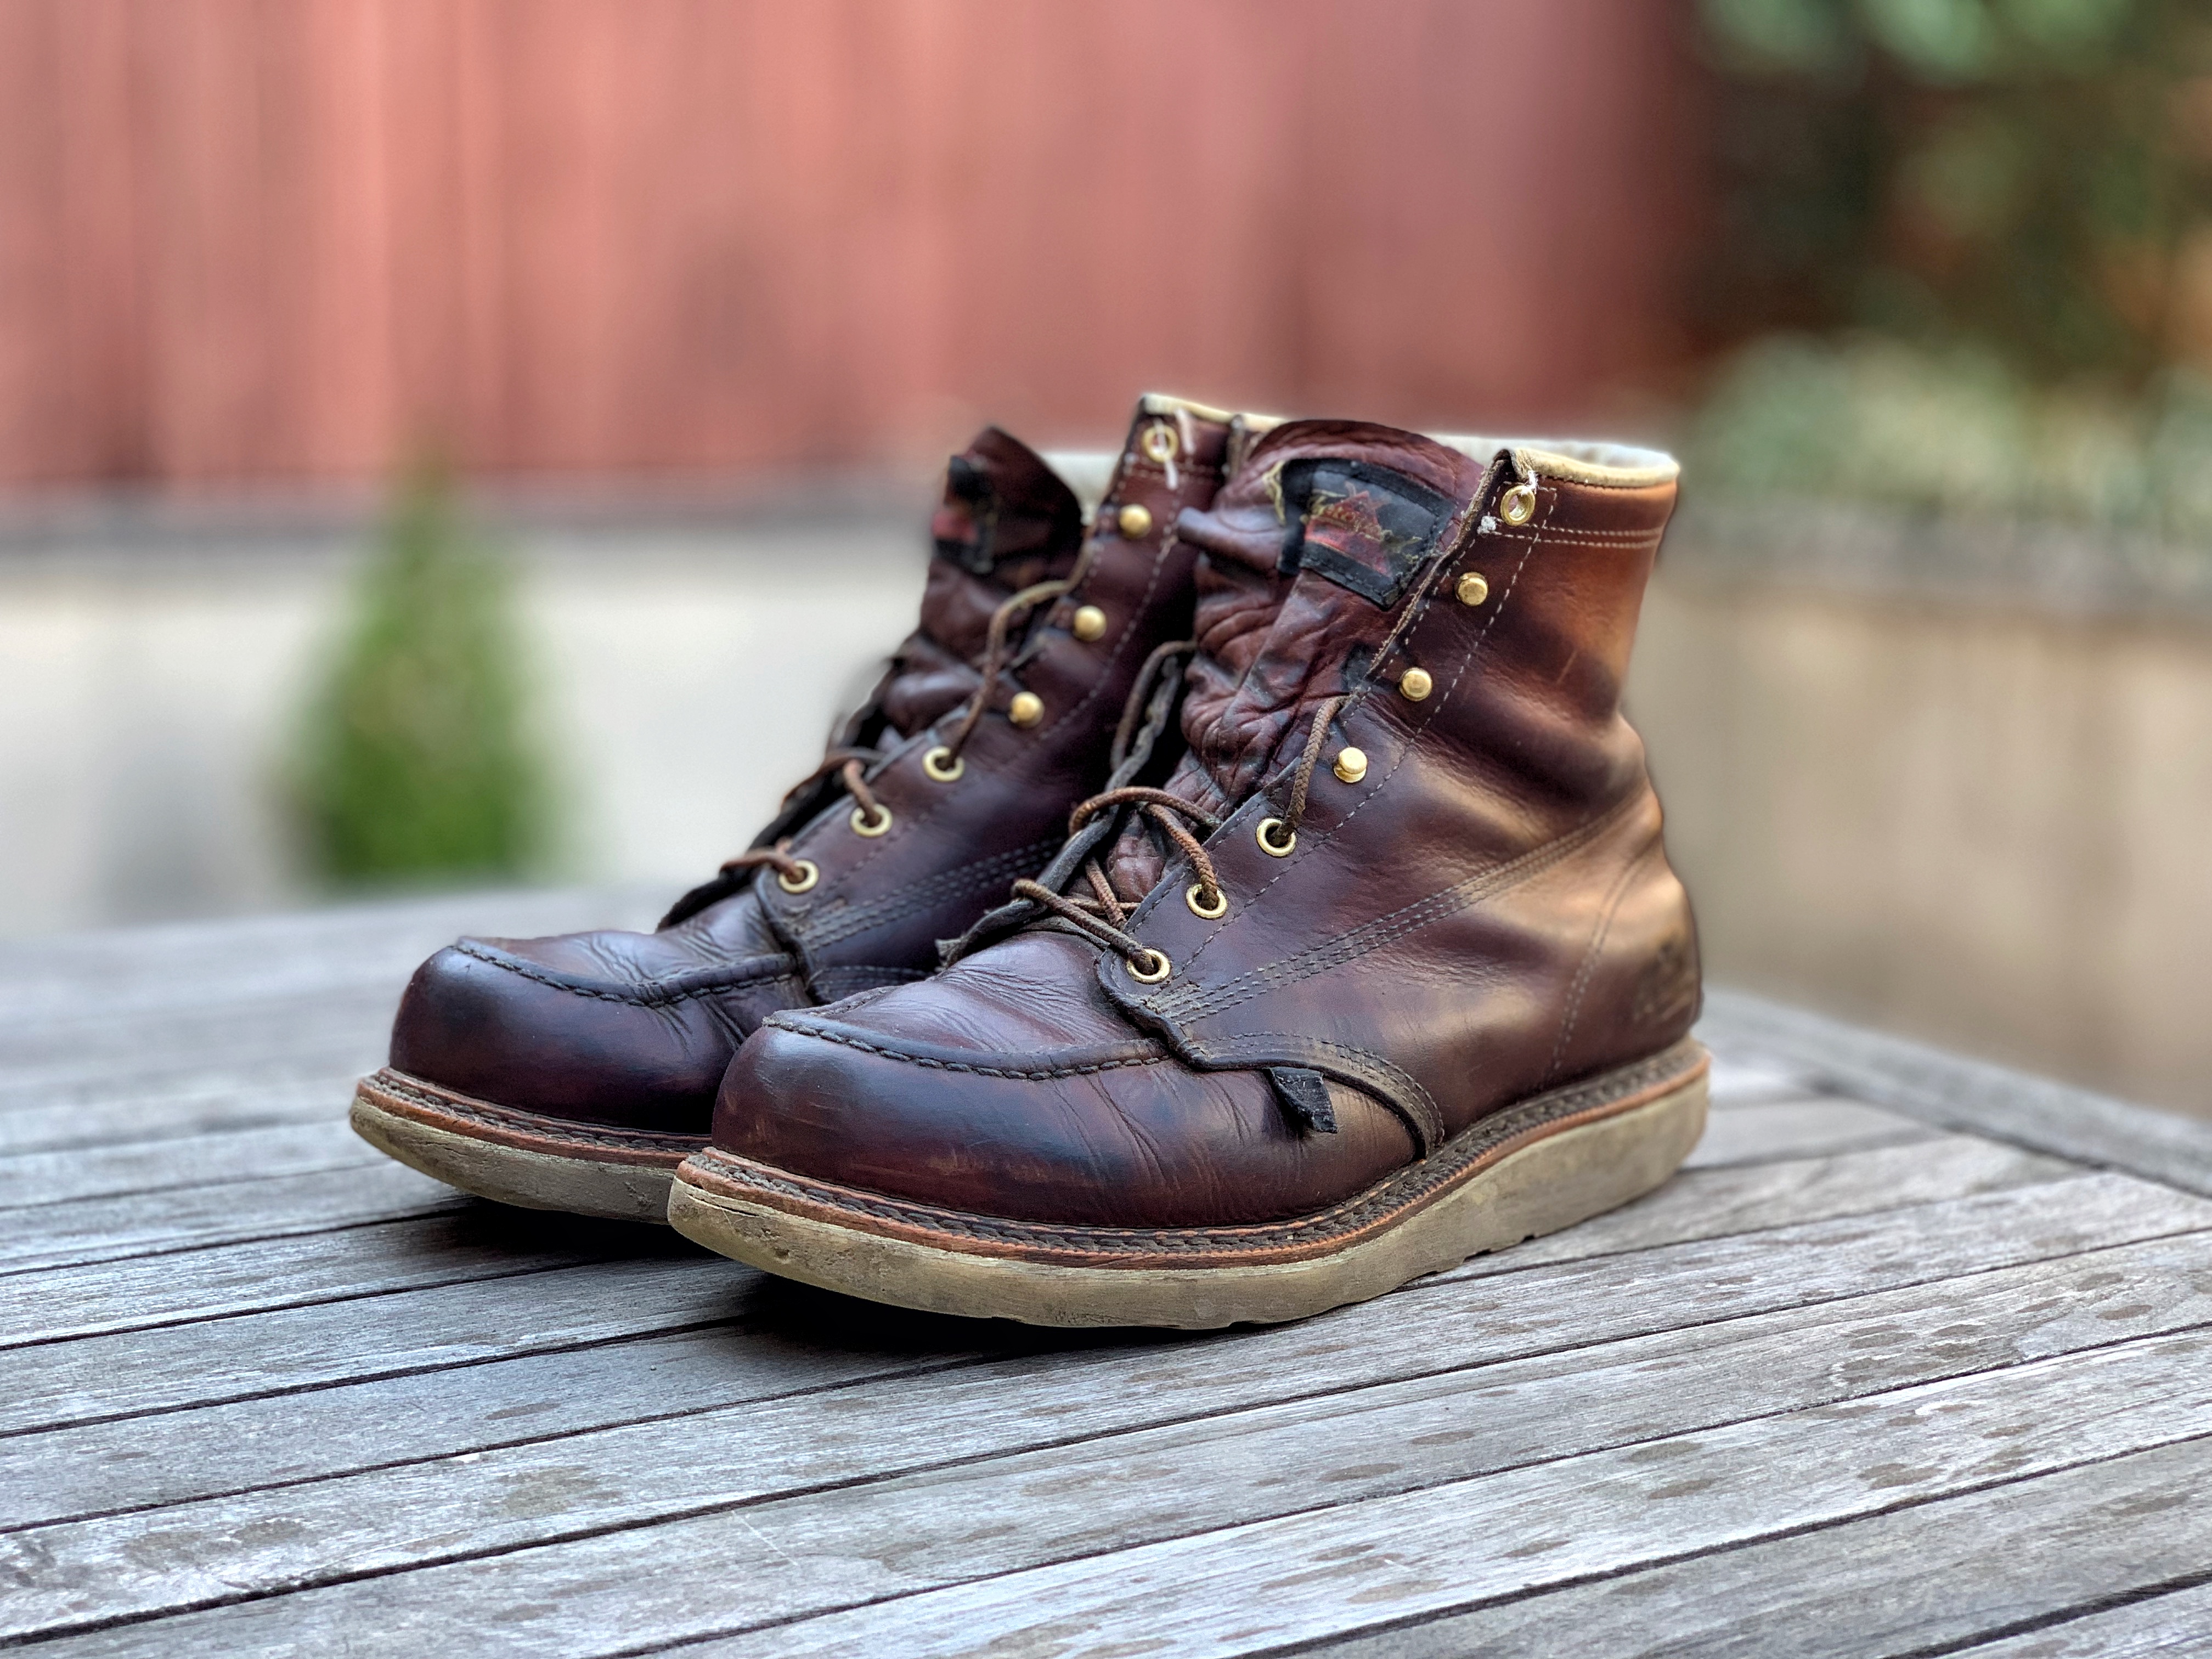 S That Thorogood Boots, American Heritage Leather Reviews